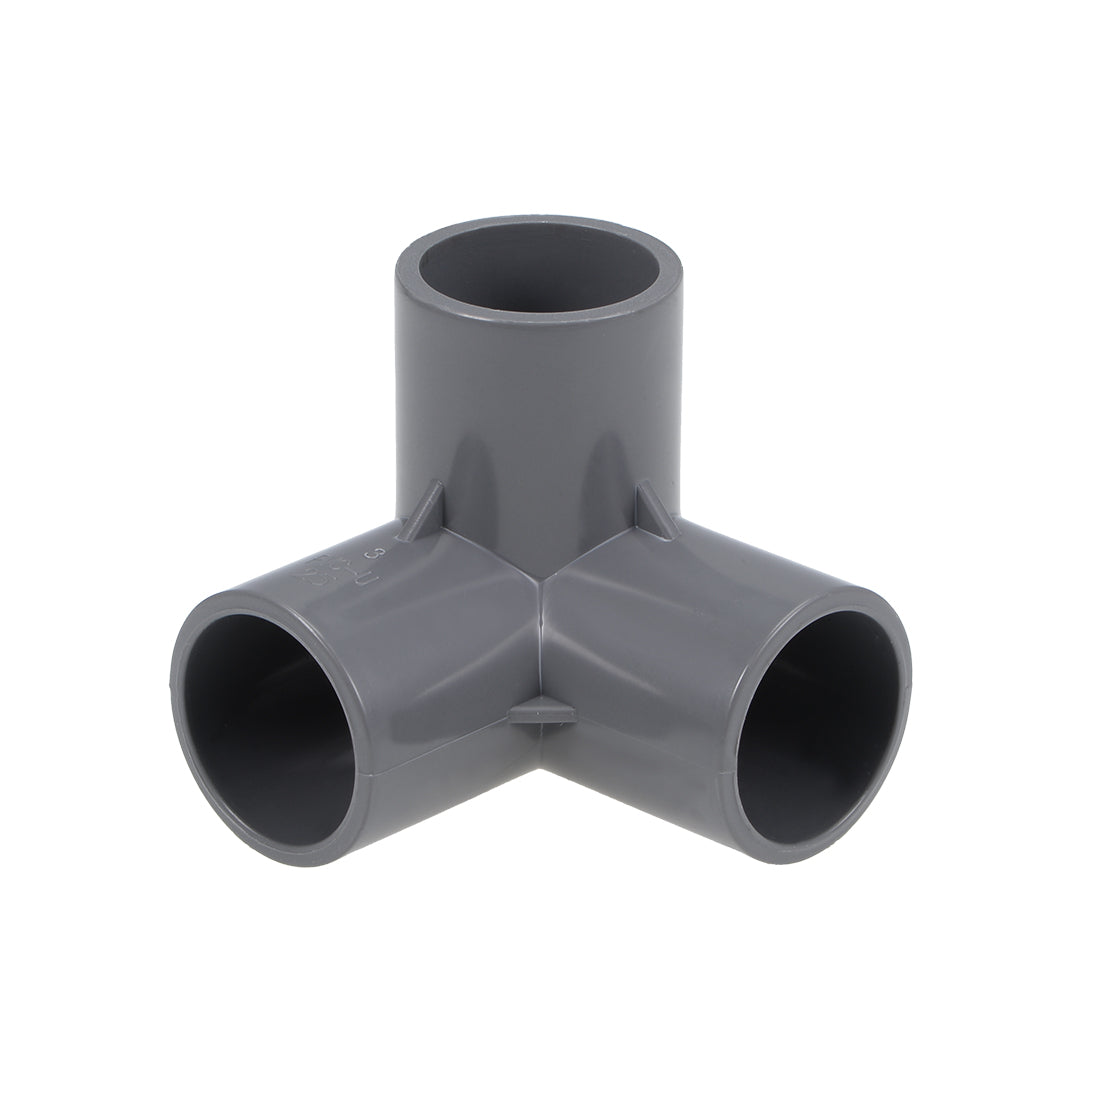 uxcell Uxcell 3-Way Elbow Metric PVC Fitting, 25mm Socket, Tee Corner Fittings Gray 10Pcs